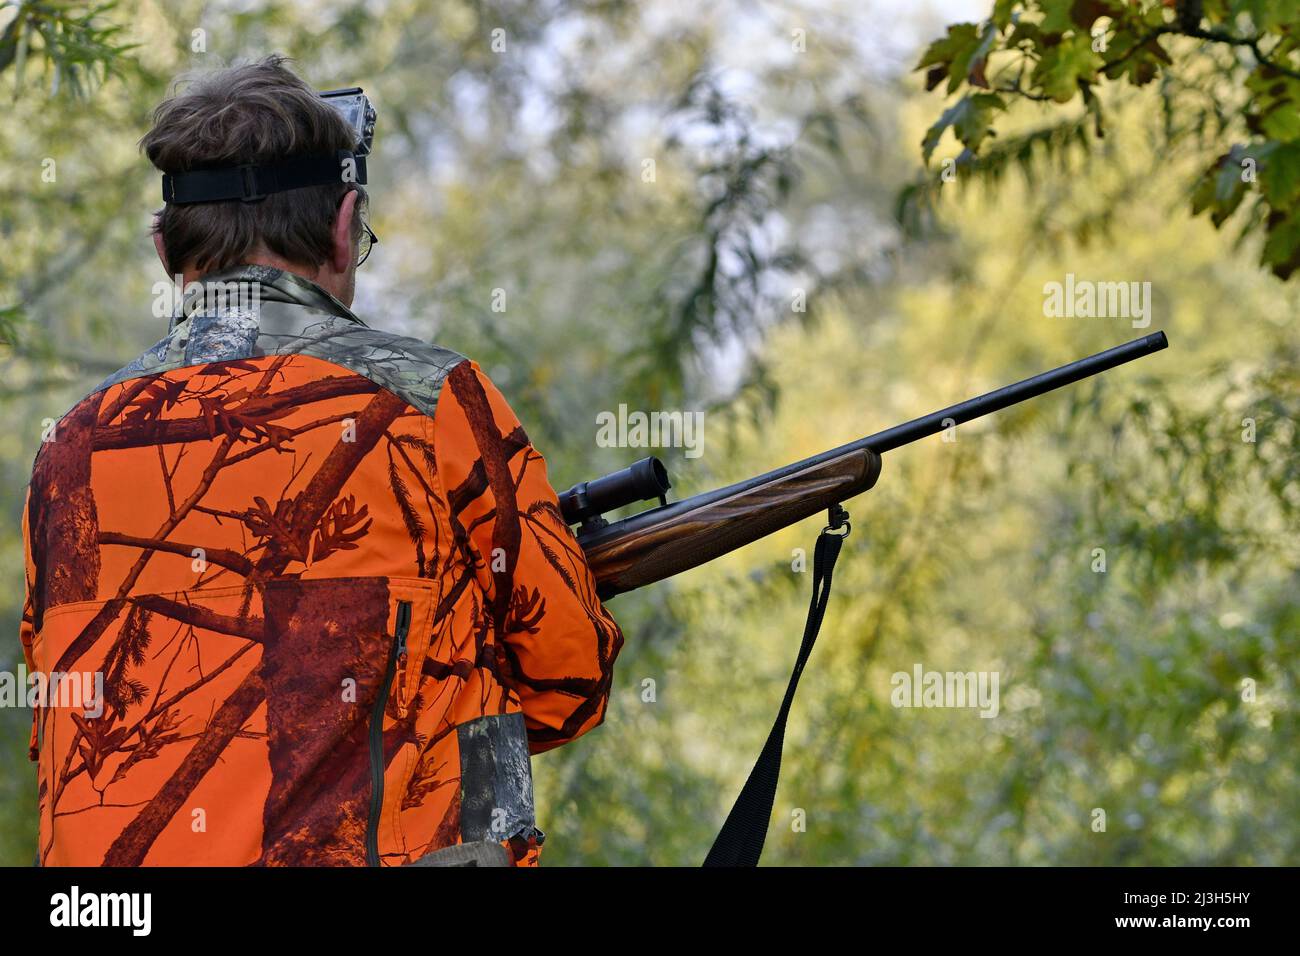 France, Doubs, Brognard, hunting, beaten with wild boars, rifle on hunting chair Stock Photo